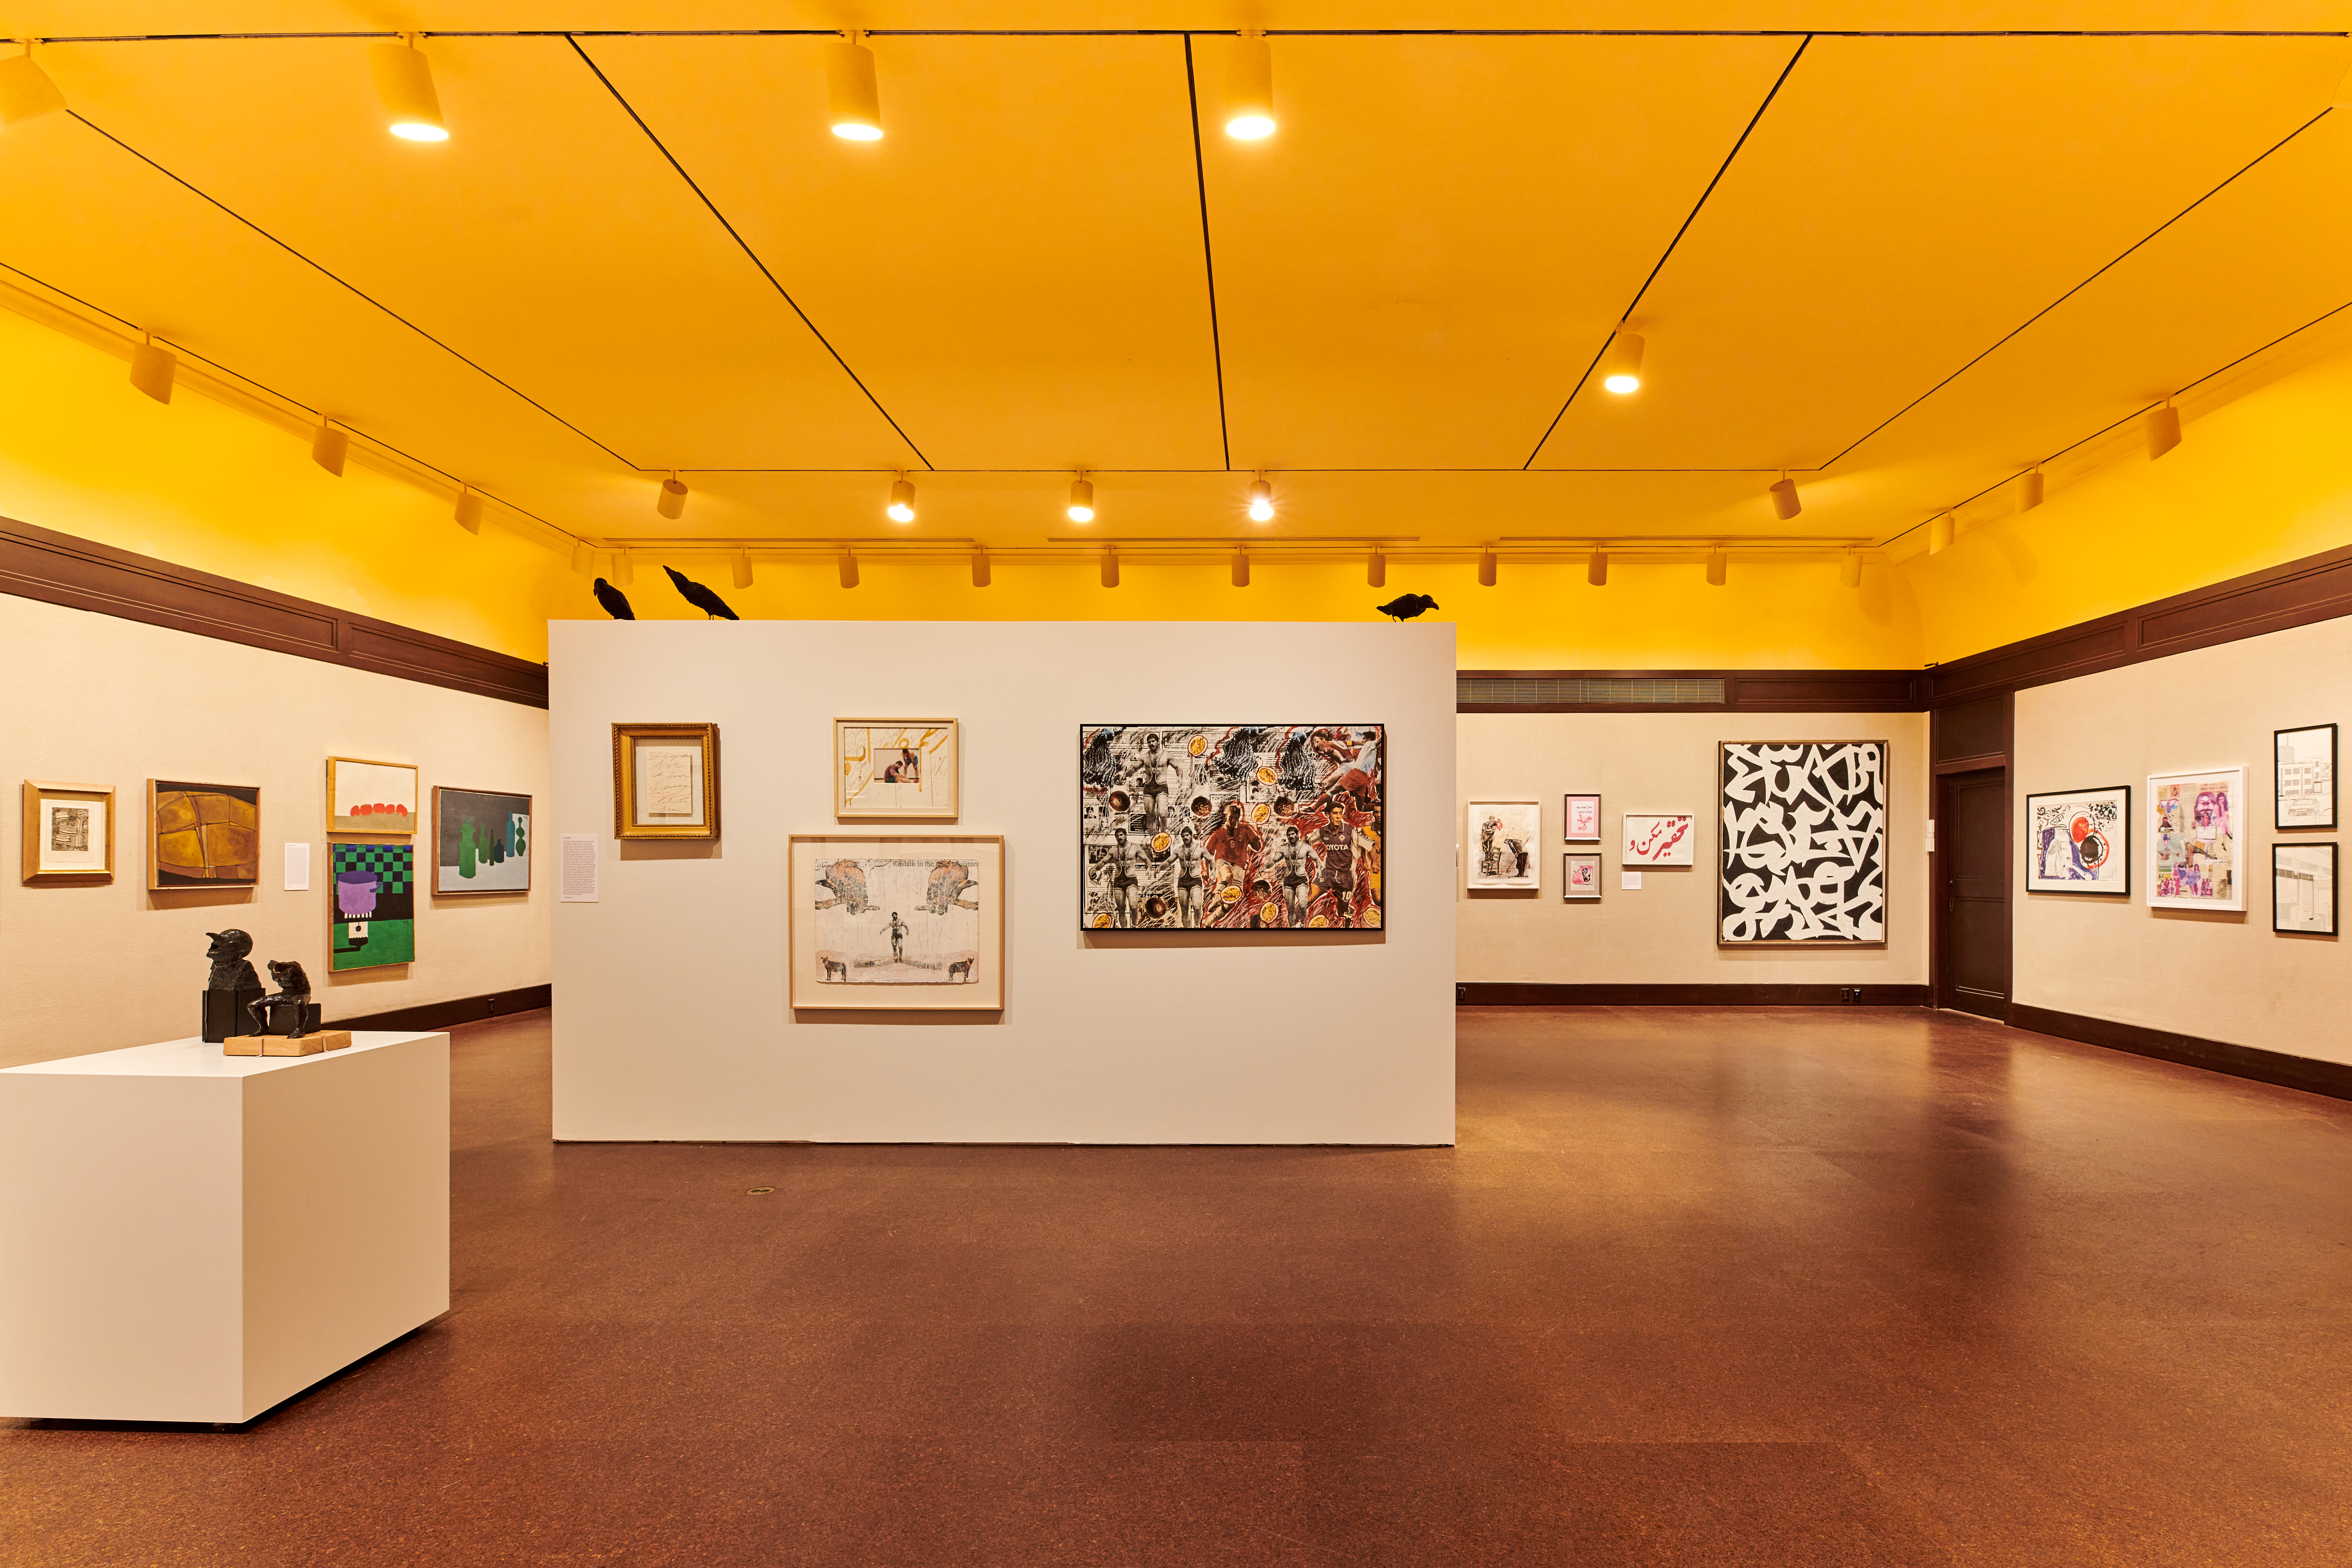 Installation view of the 58th Carnegie International featuring works by artists from the Laal Collection